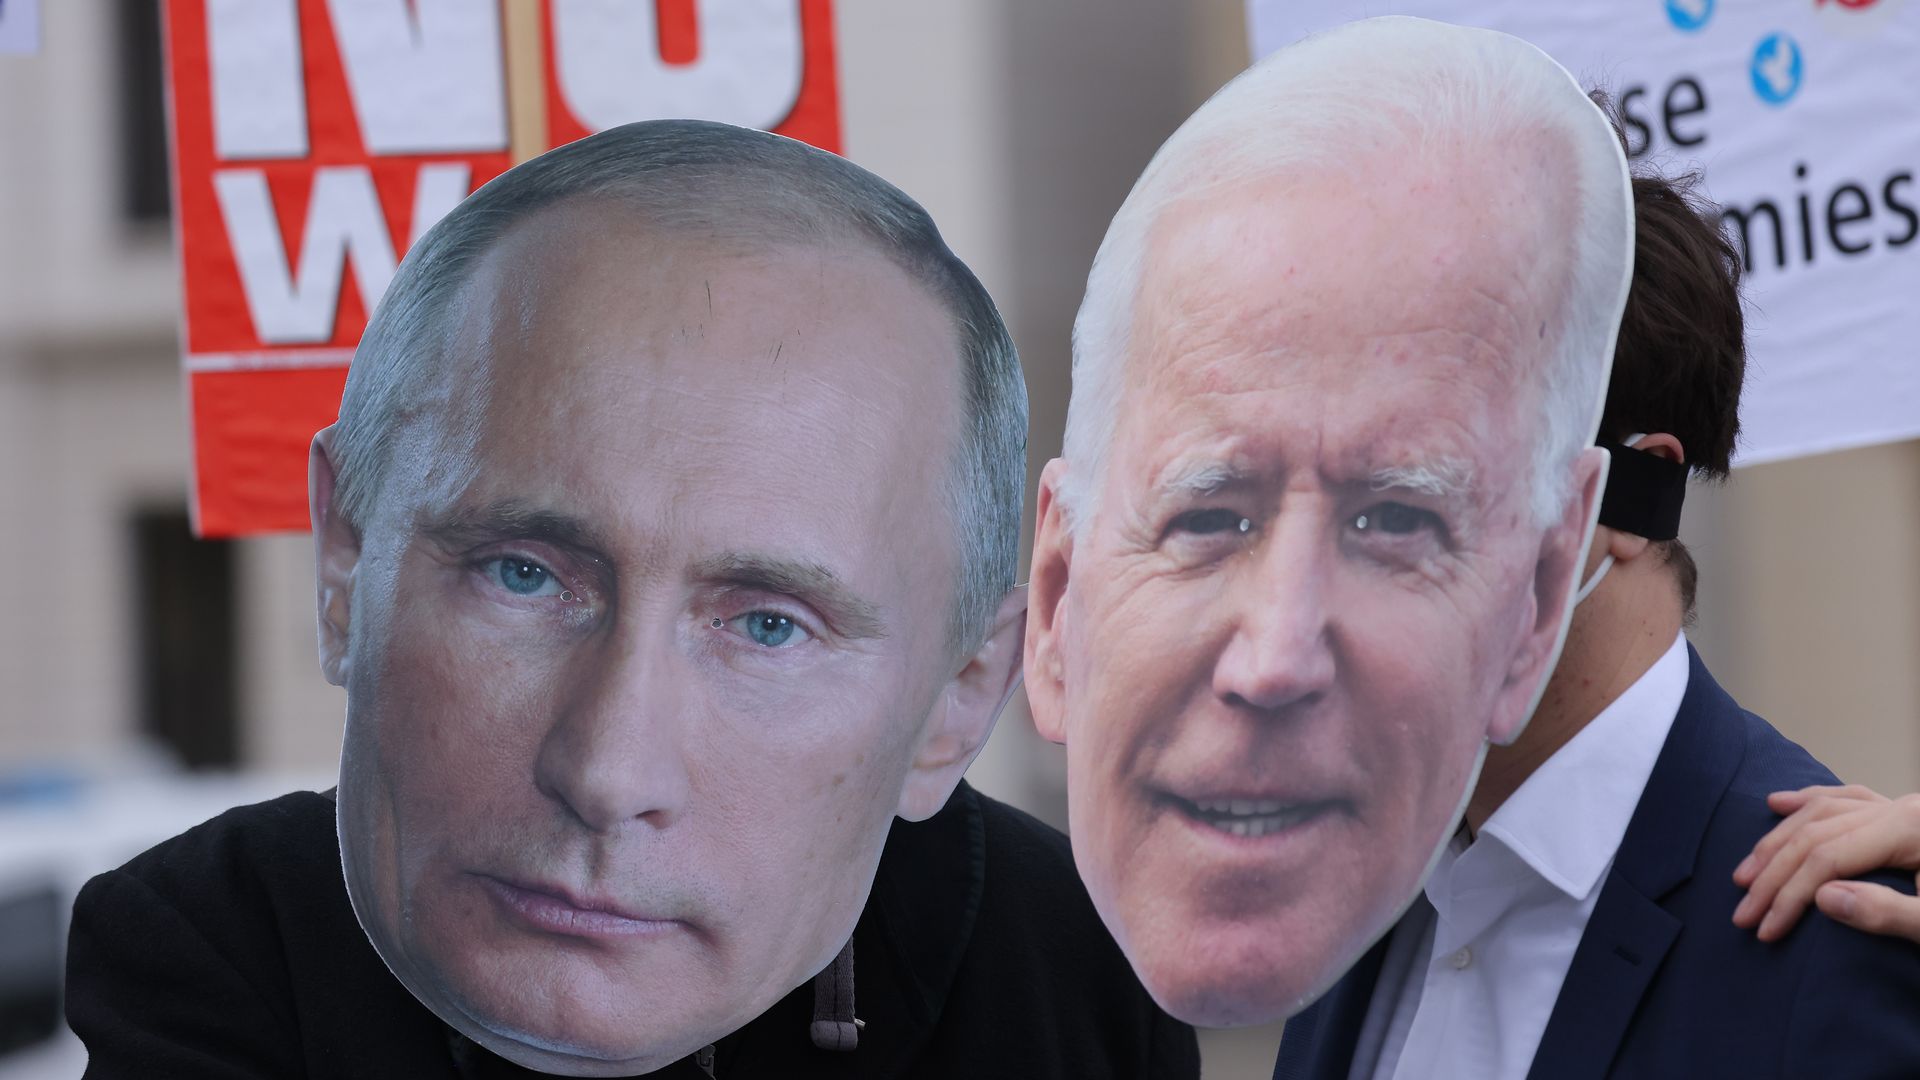 Cutout color images of Vladimir Putin and Joe Biden's faces are held by anti-war protesters in Berlin